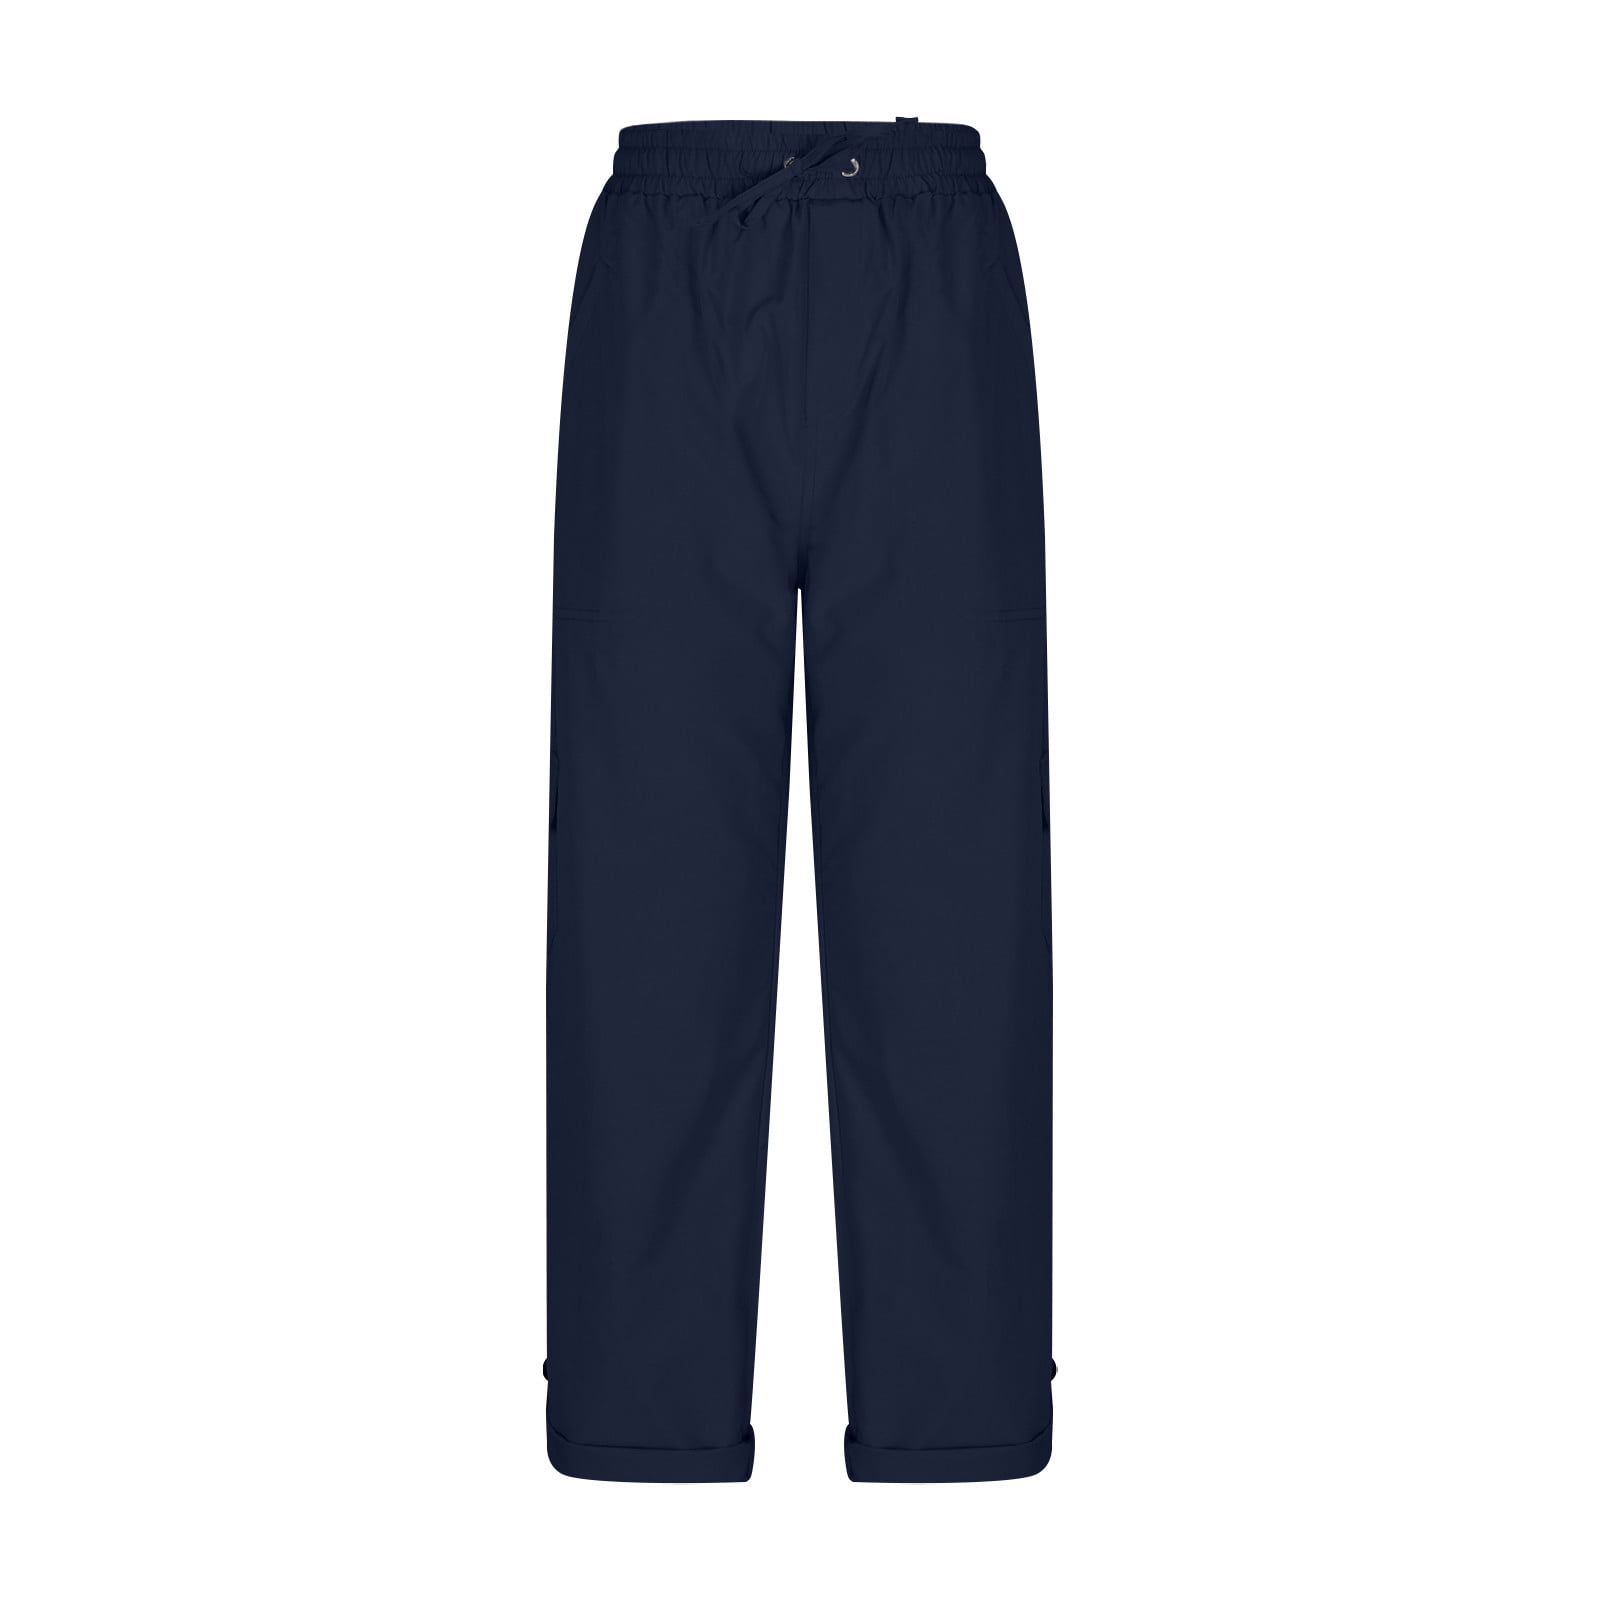 Buy Blue Corduroy Stretch Cargo Pants Online in India